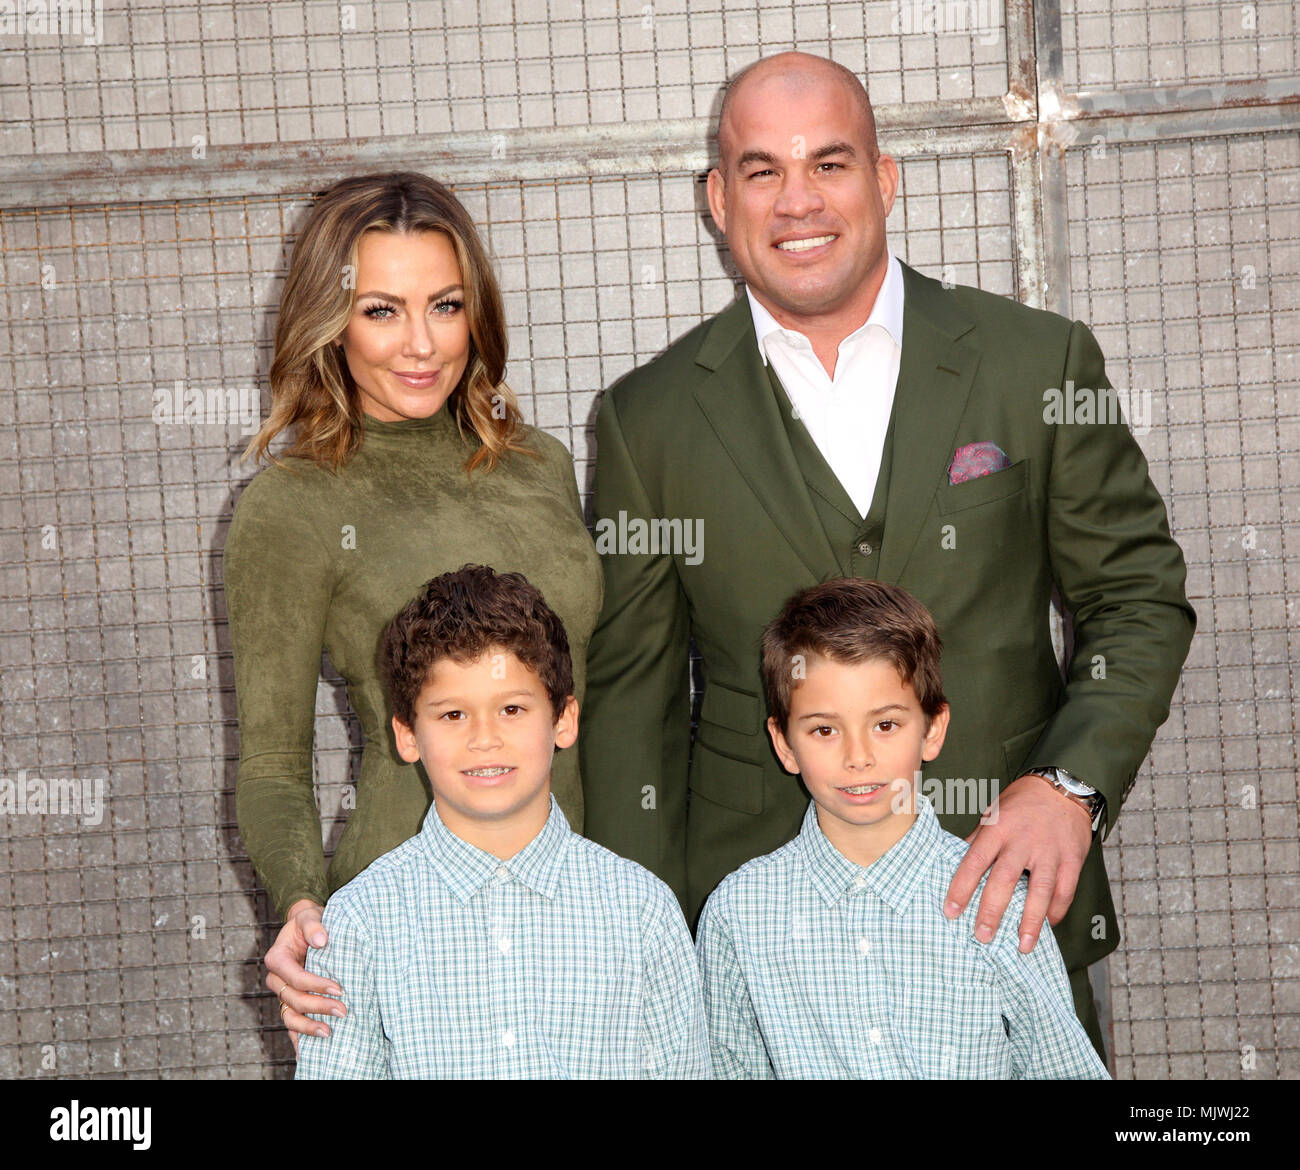 Celebrities attend 'Rampage' film premiere at the Microsoft Theater.  Featuring: Tito Ortiz with family Where: Los Angeles, California, United States When: 05 Apr 2018 Credit: Brian To/WENN.com Stock Photo